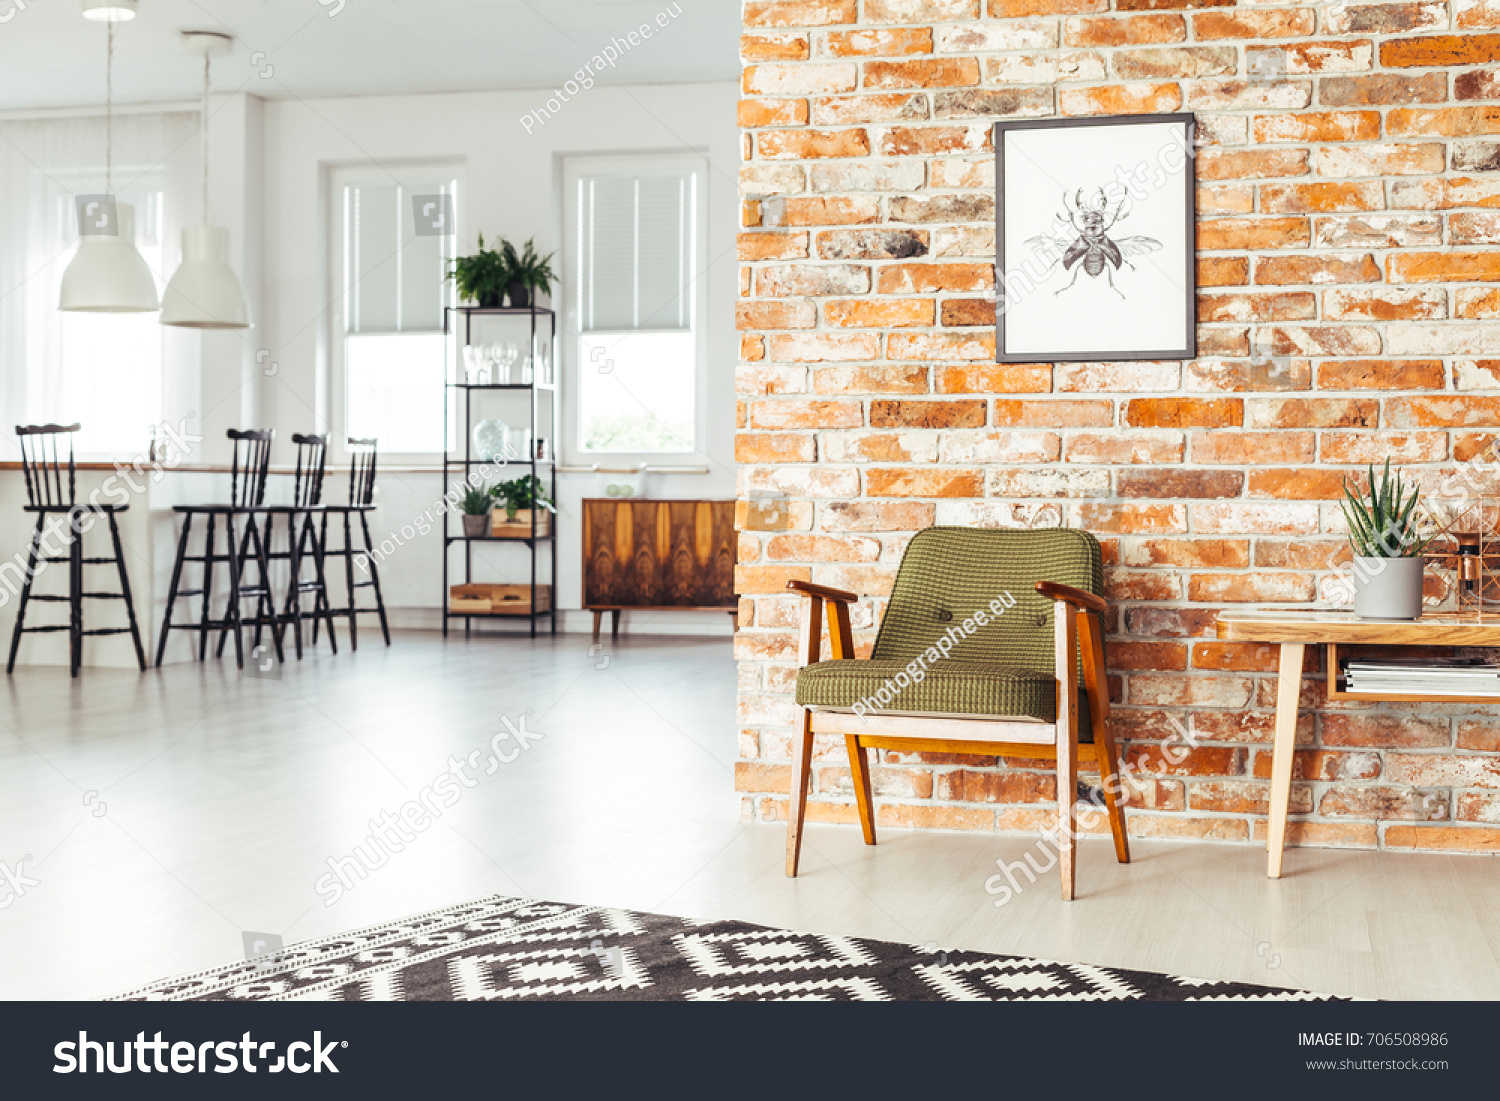 White lamps above countertop with bar stools in dining room with rustic furniture and poster on brick wall #706508986